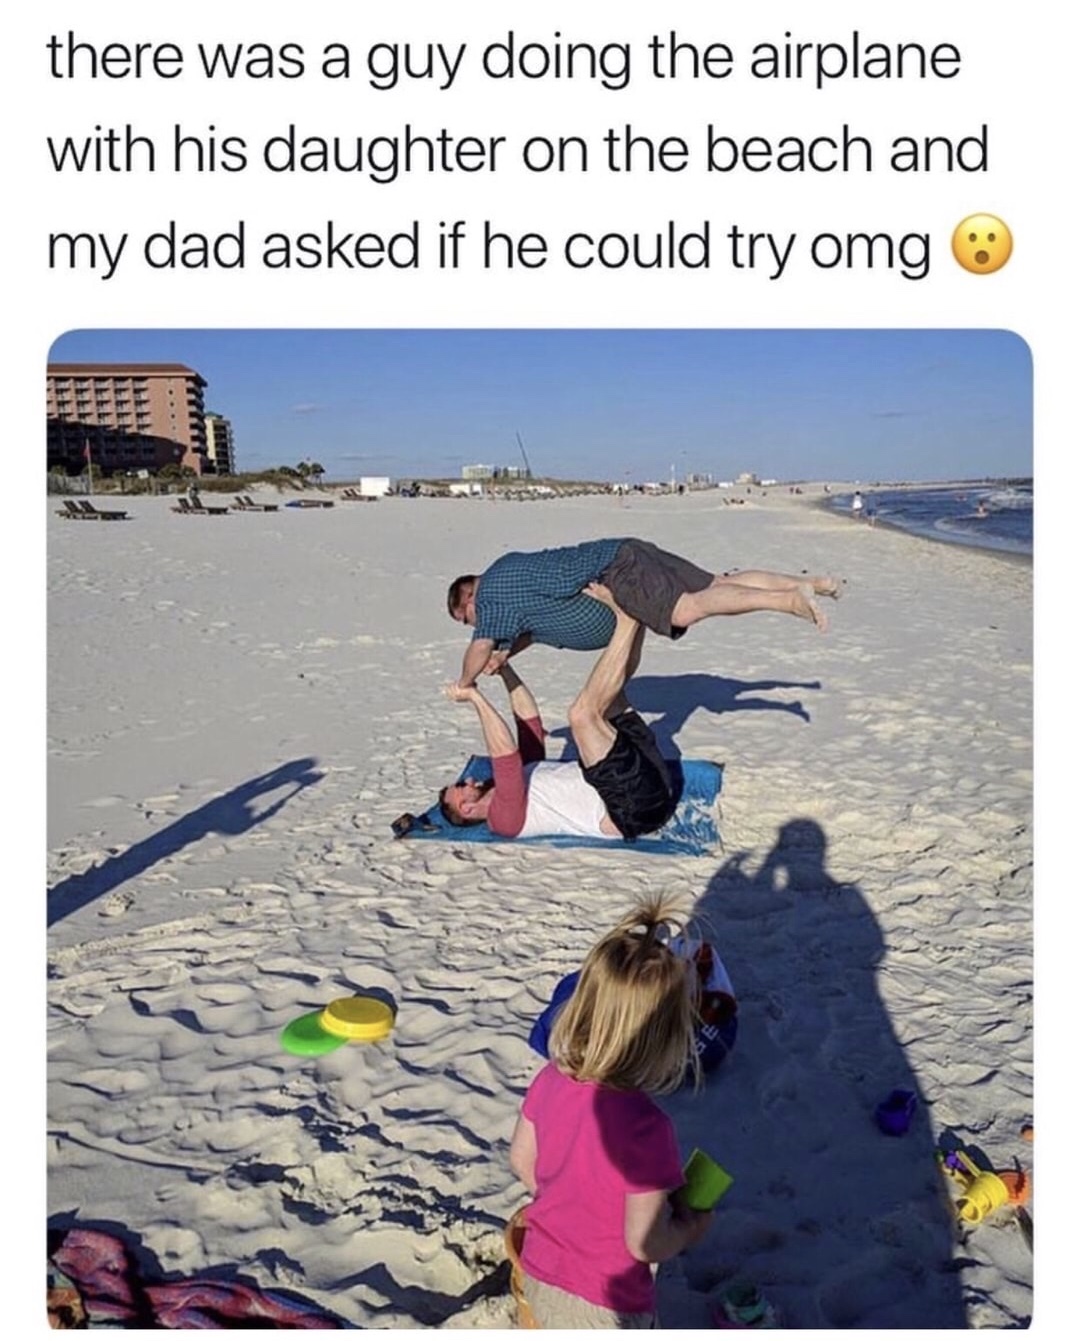 funny Monday meme with pic of an adult man being lifted like a kid